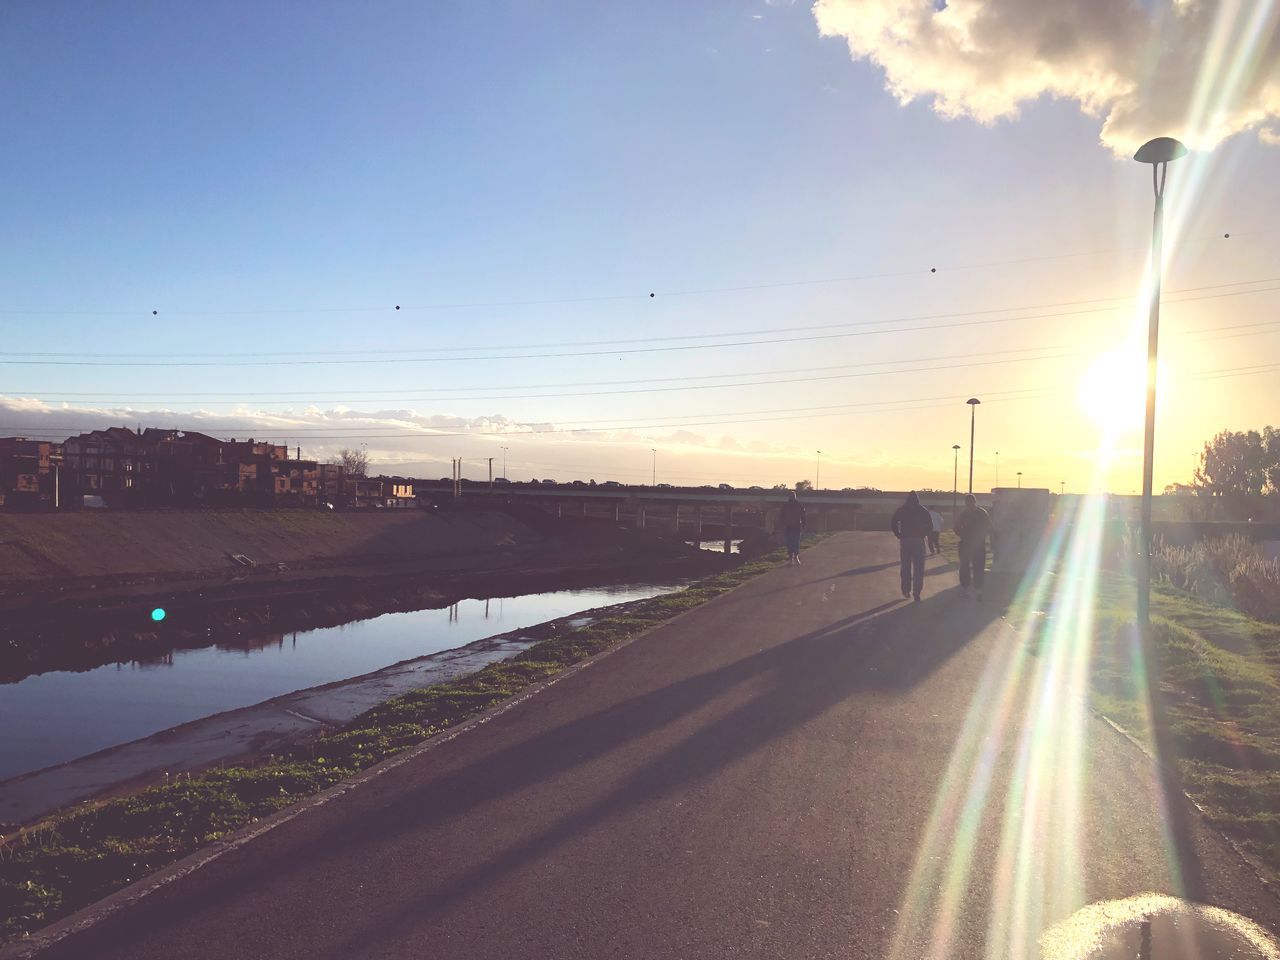 lens flare, sun, sunset, sunlight, sunbeam, sky, no people, road, water, motion, transportation, nature, outdoors, scenics, beauty in nature, day